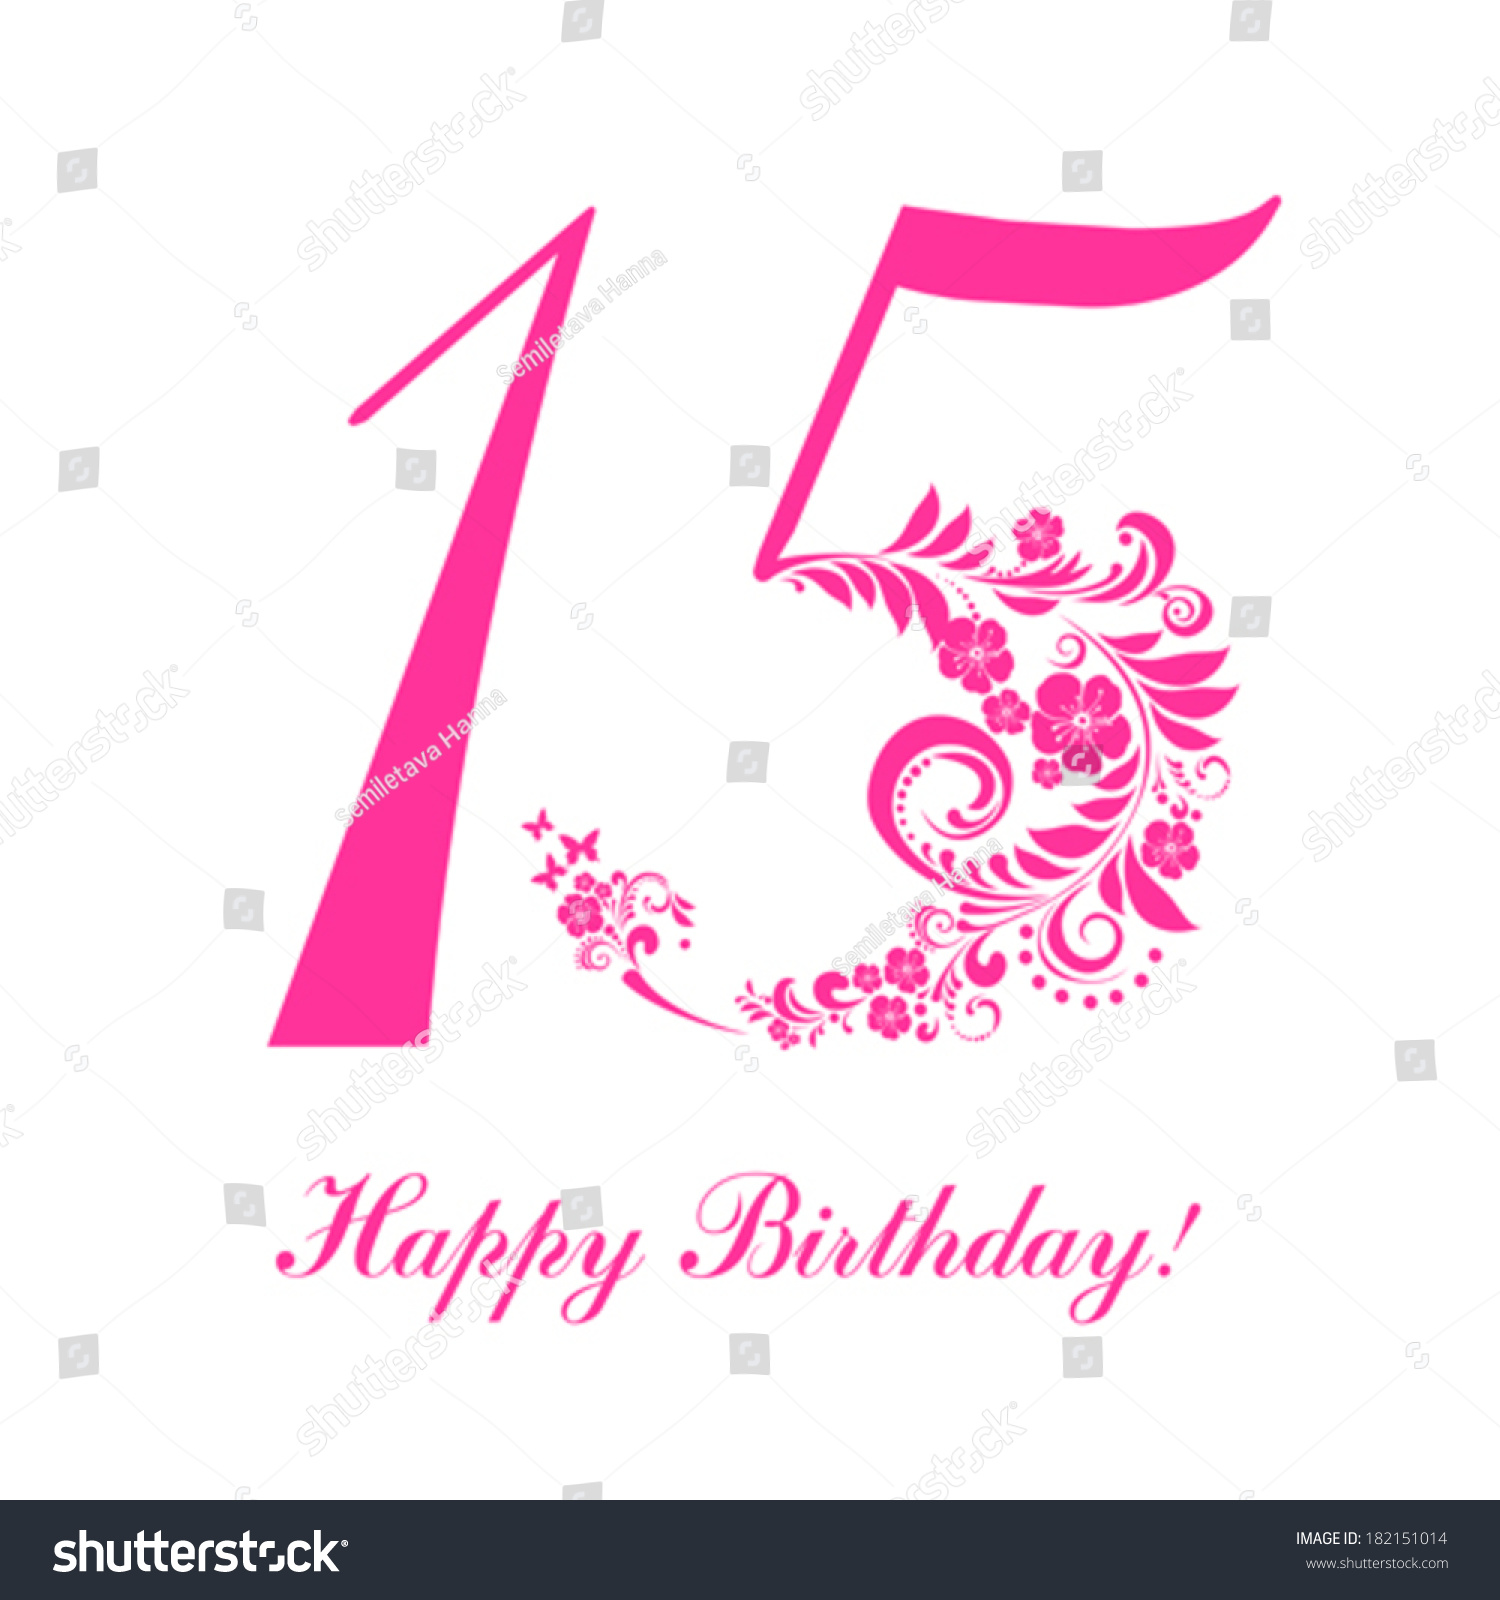 Happy Birthday Card. Celebration Background With Number Fifteen And ...